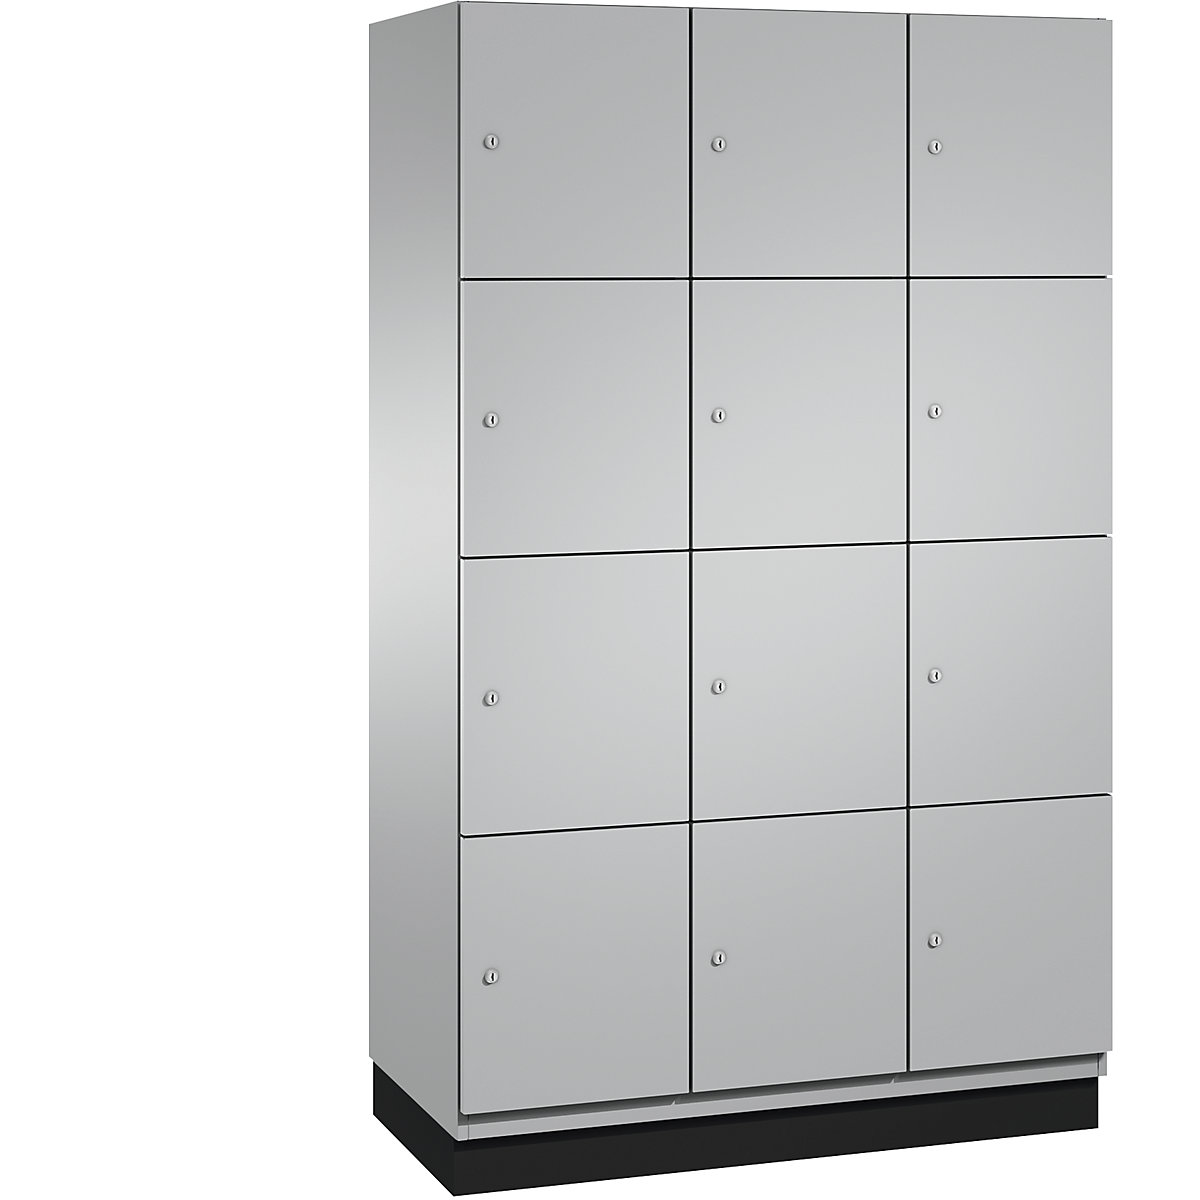 CAMBIO compartment locker with sheet steel doors – C+P, 12 compartments, width 1200 mm, body white aluminium / door white aluminium, compartment height 462.5 mm-24